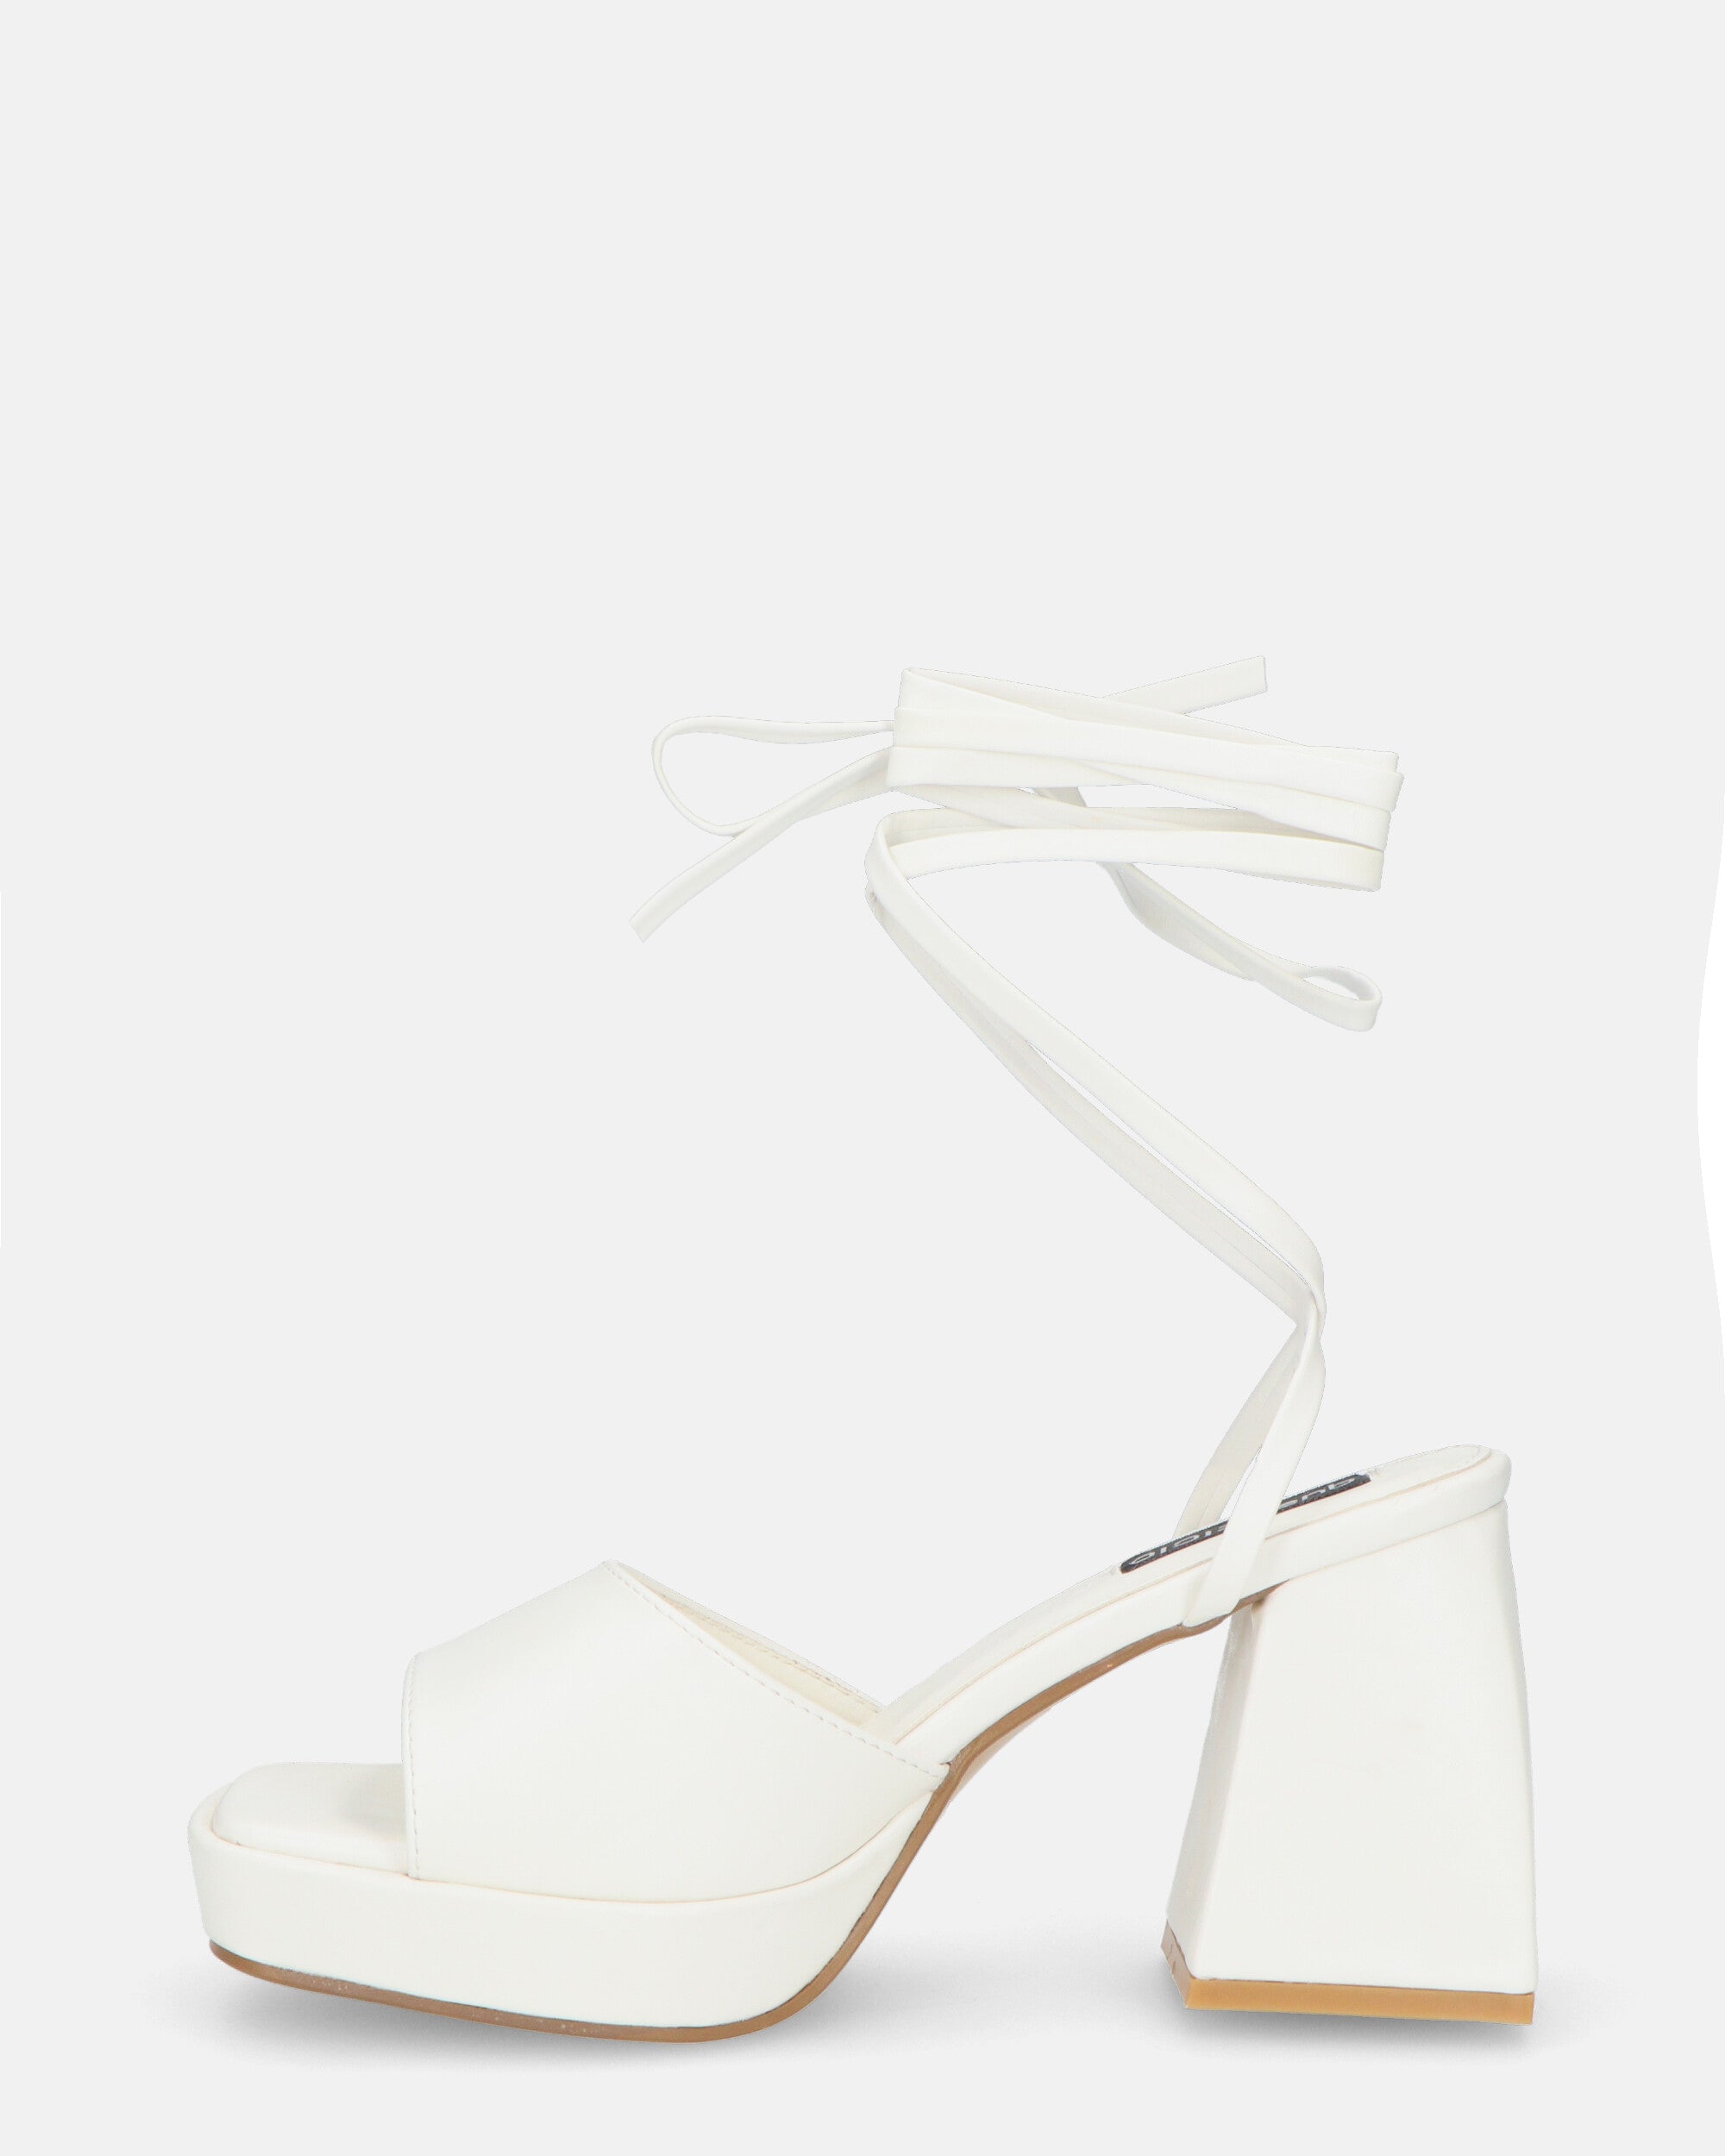 TOMI - sandals in white with laces and squared heel